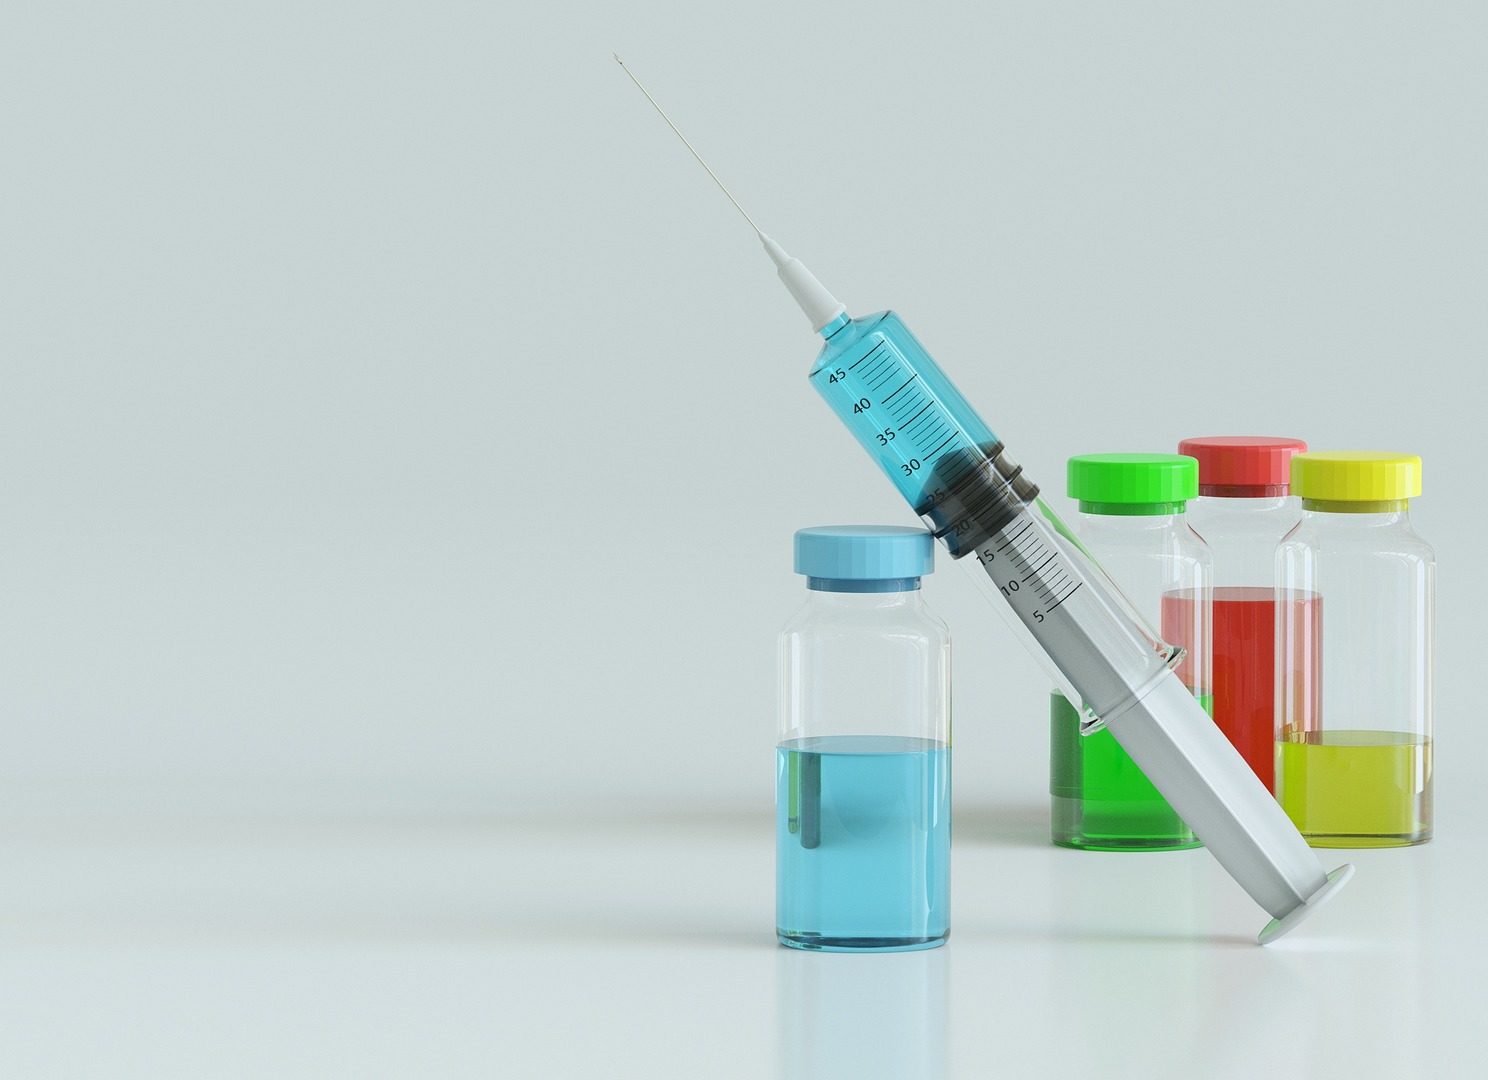 Photo of multiple colored vials with needle/syringe